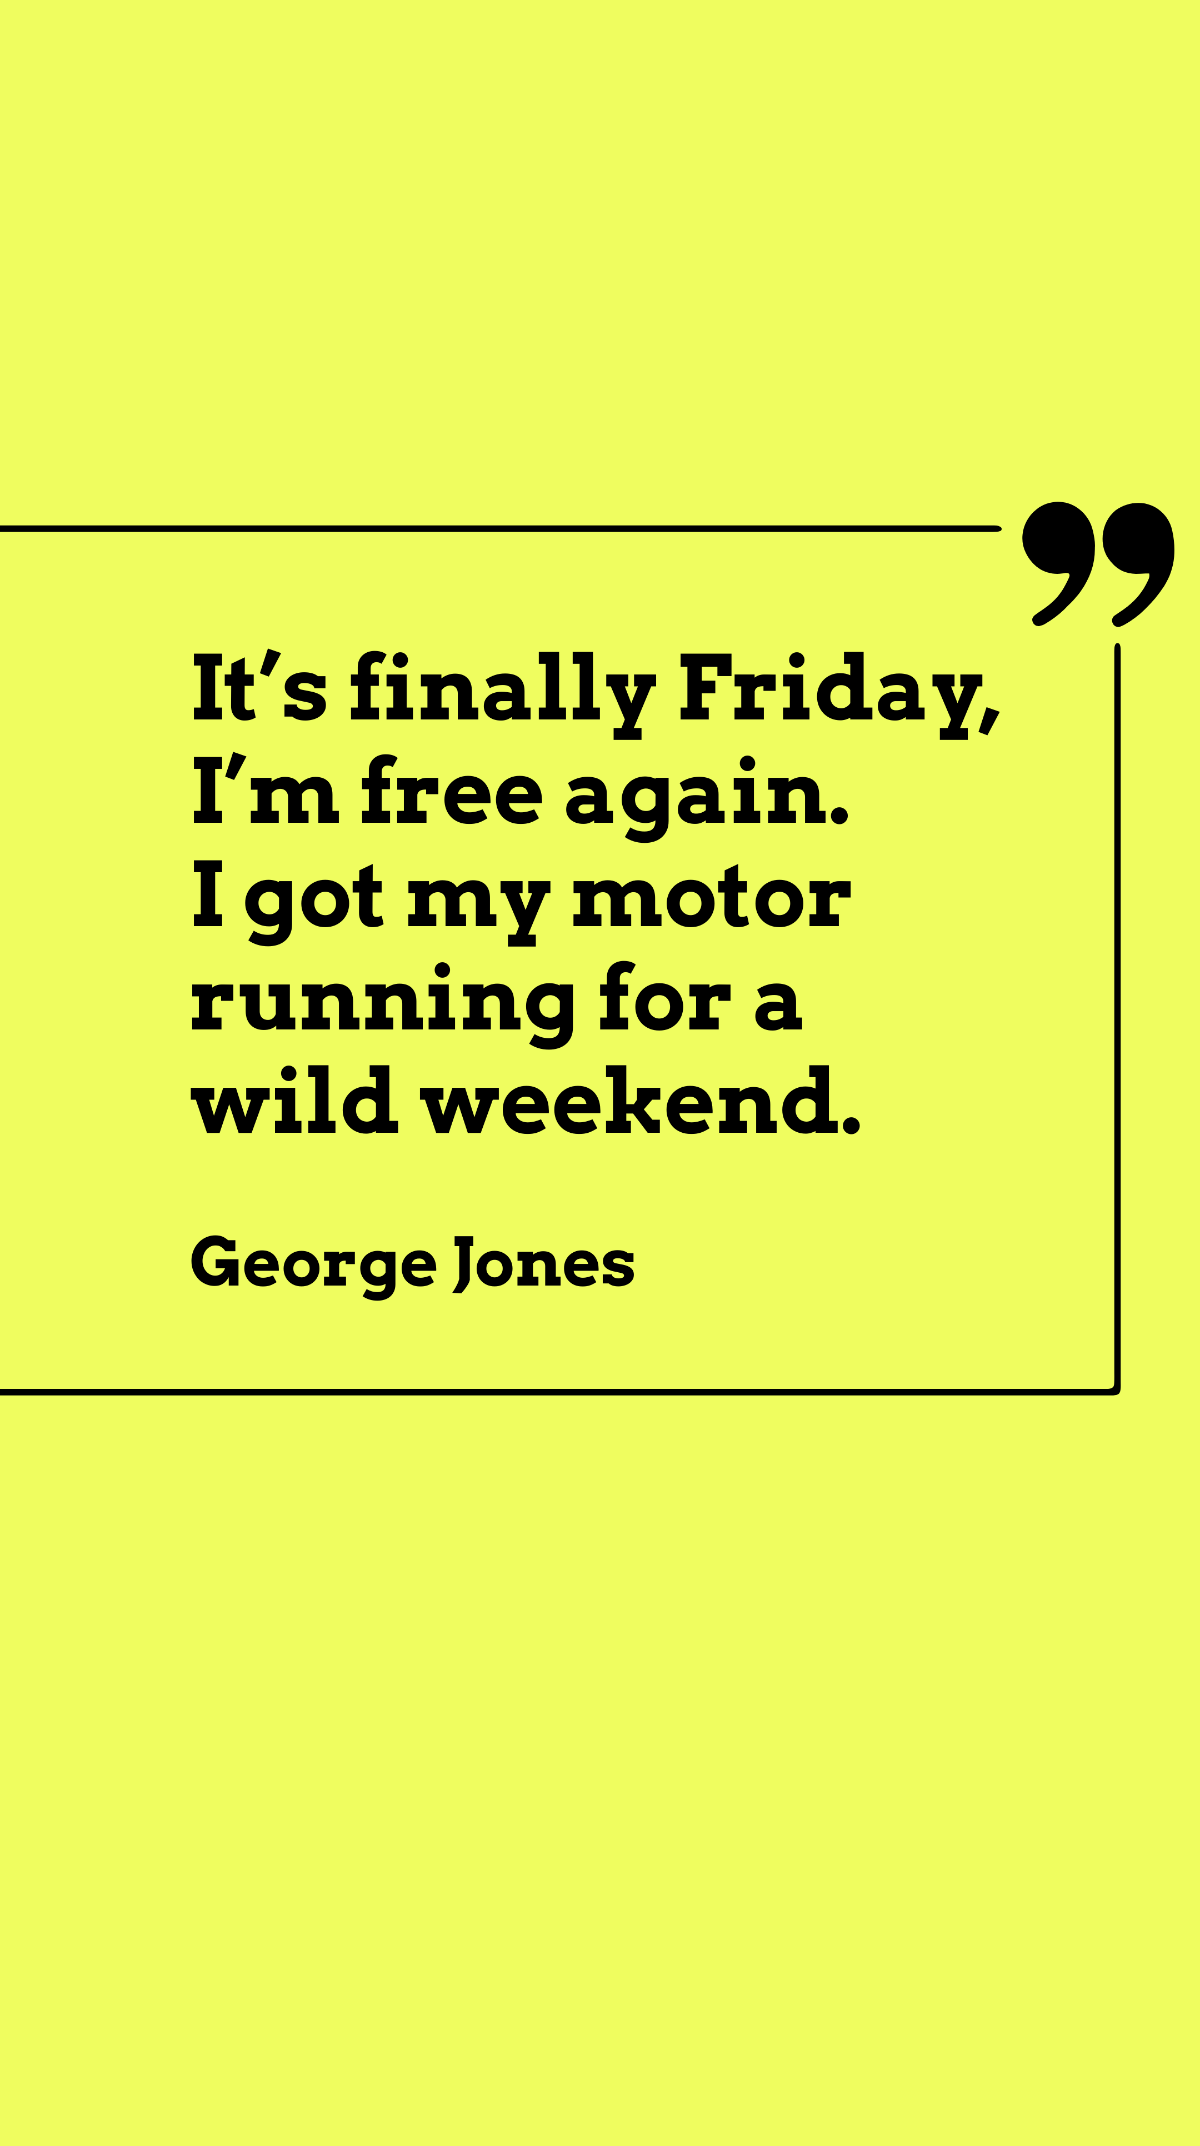 George Jones - It’s finally Friday, I’m again. I got my motor running for a wild weekend.